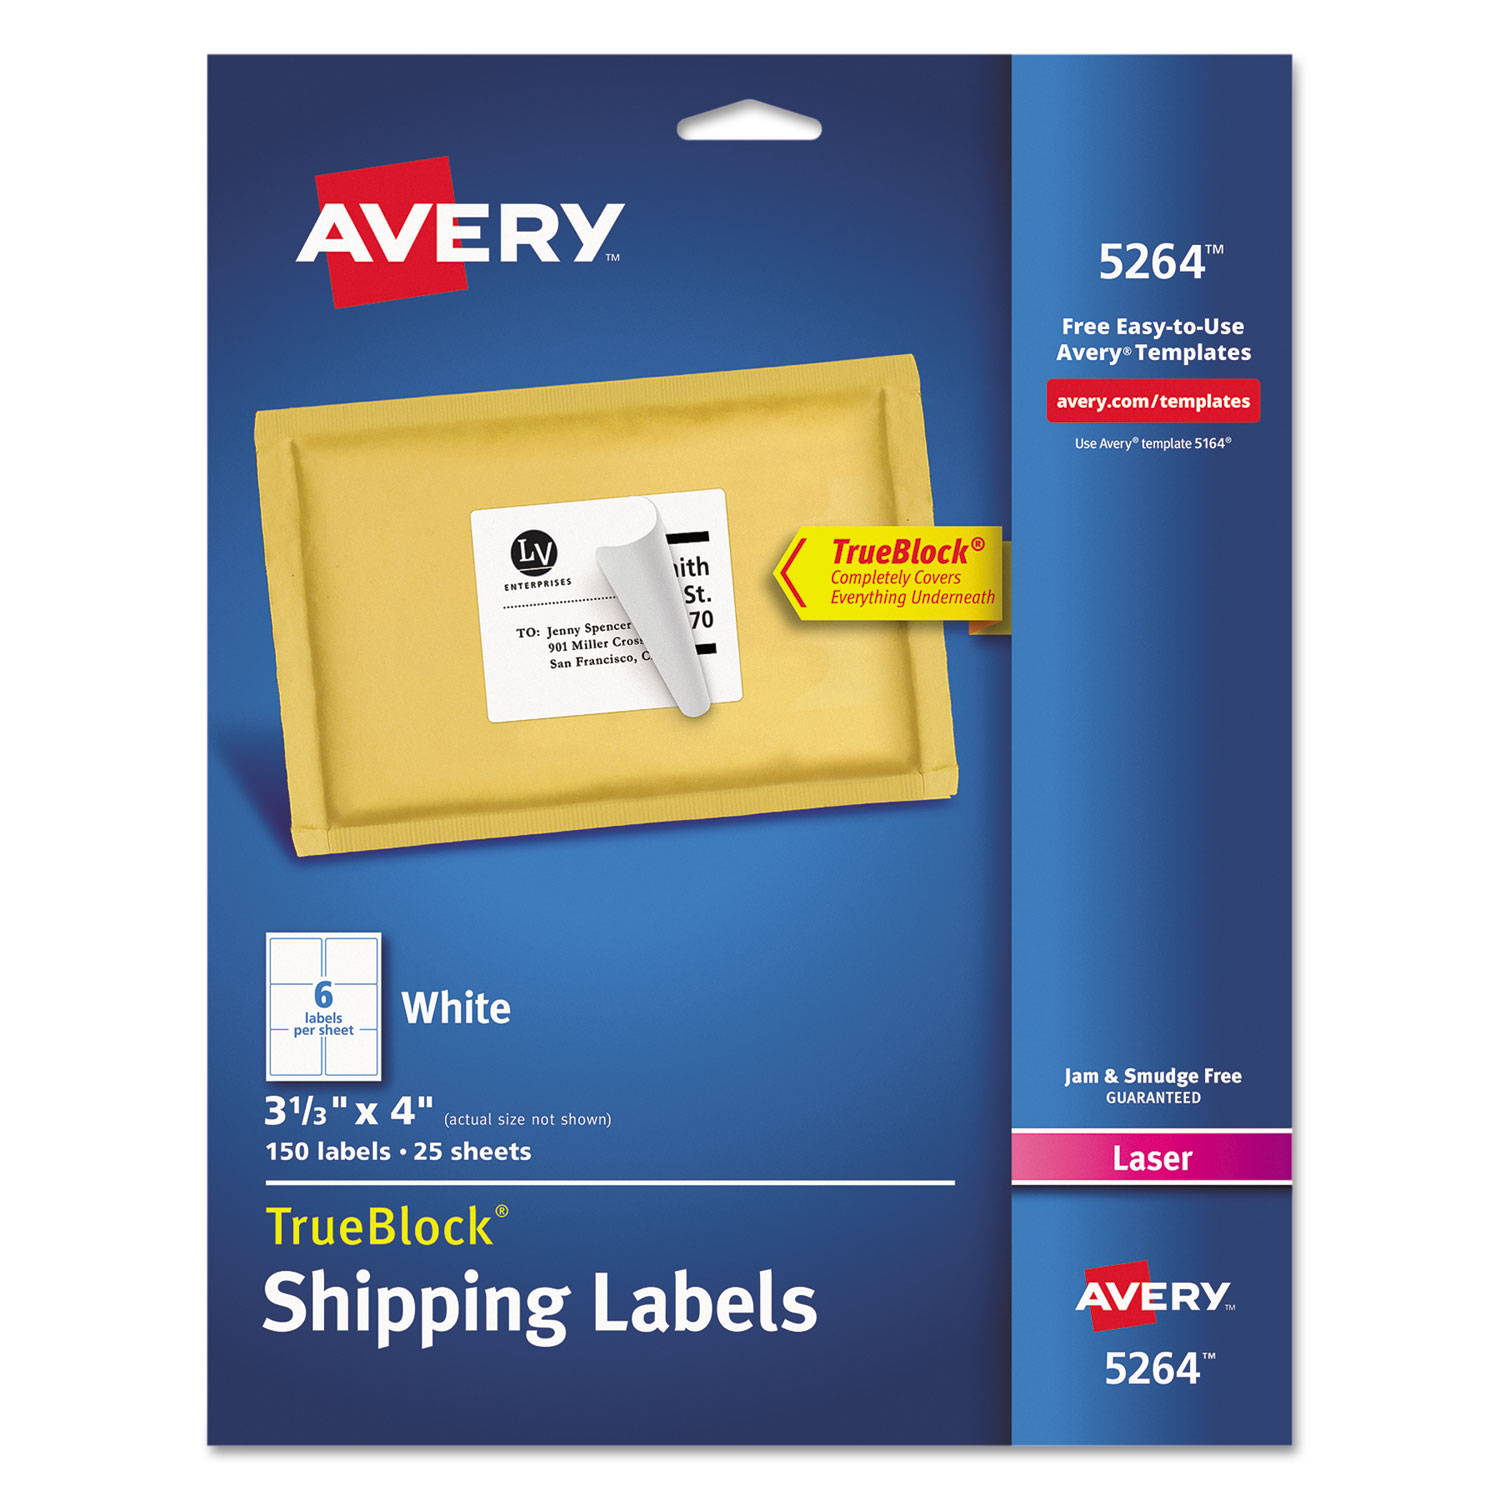  Avery 05264 Shipping Labels w/ TrueBlock Technology, Laser Printers, 3.33 x 4, White, 6/Sheet, 25 Sheets/Pack (AVE5264) 